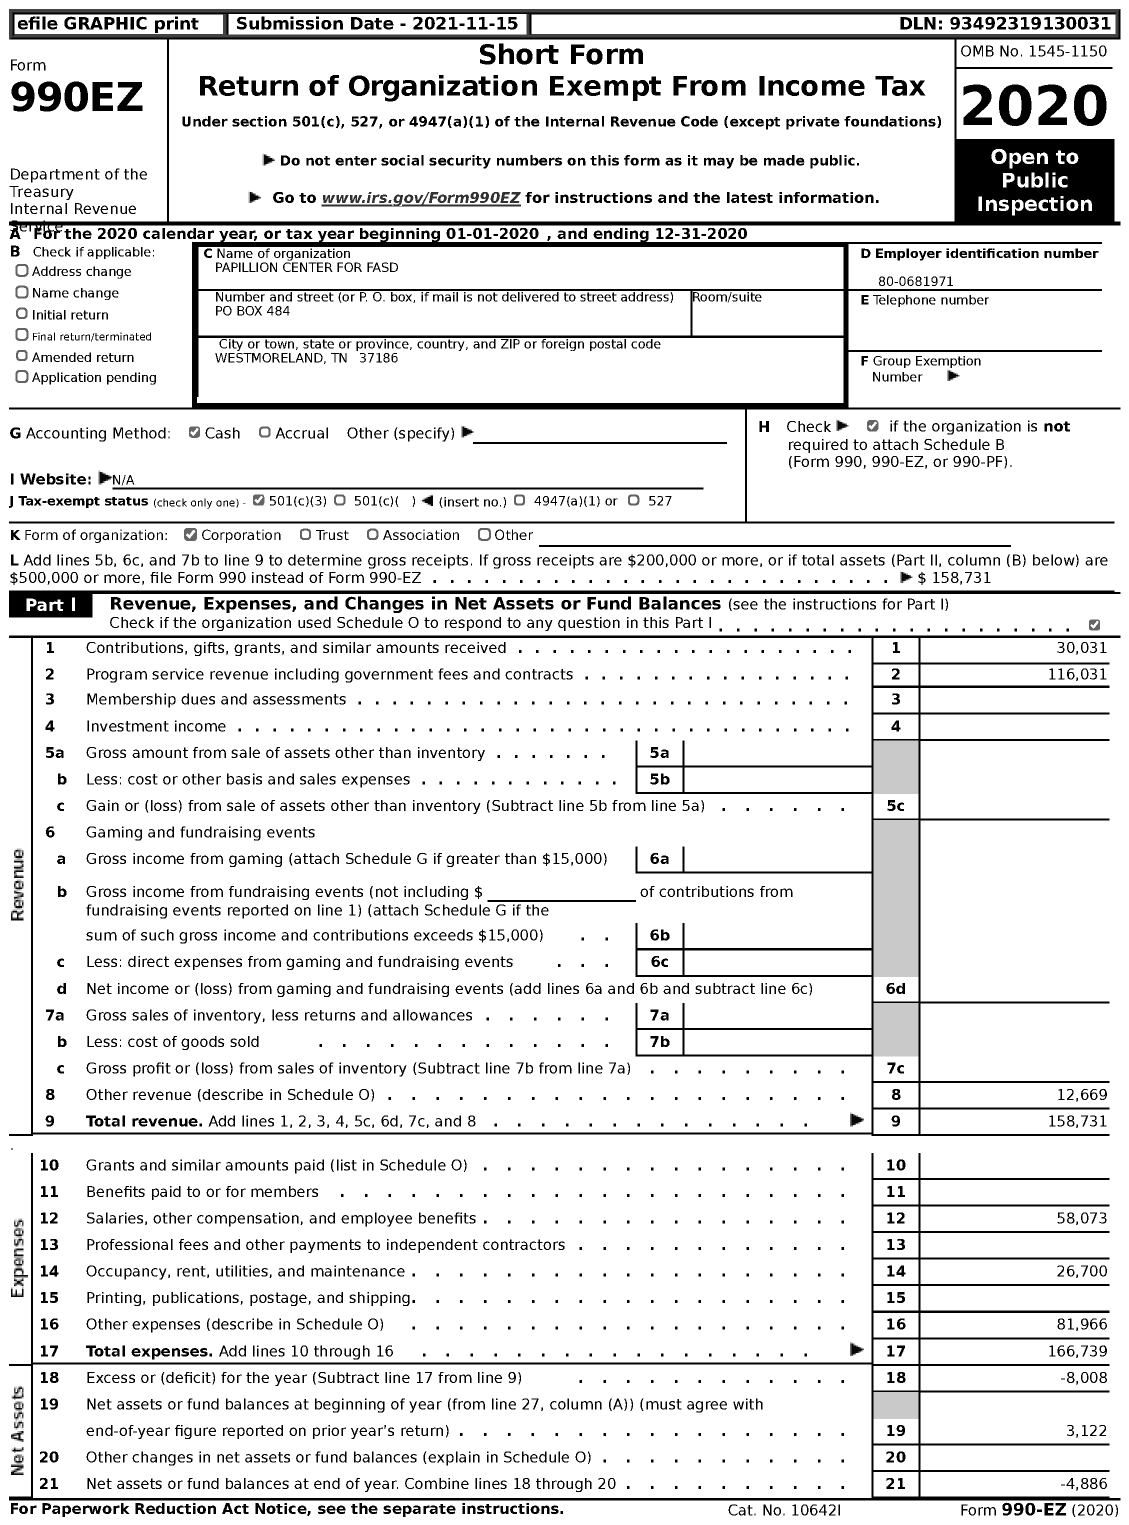 Image of first page of 2020 Form 990EZ for Papillion Center for Fasd